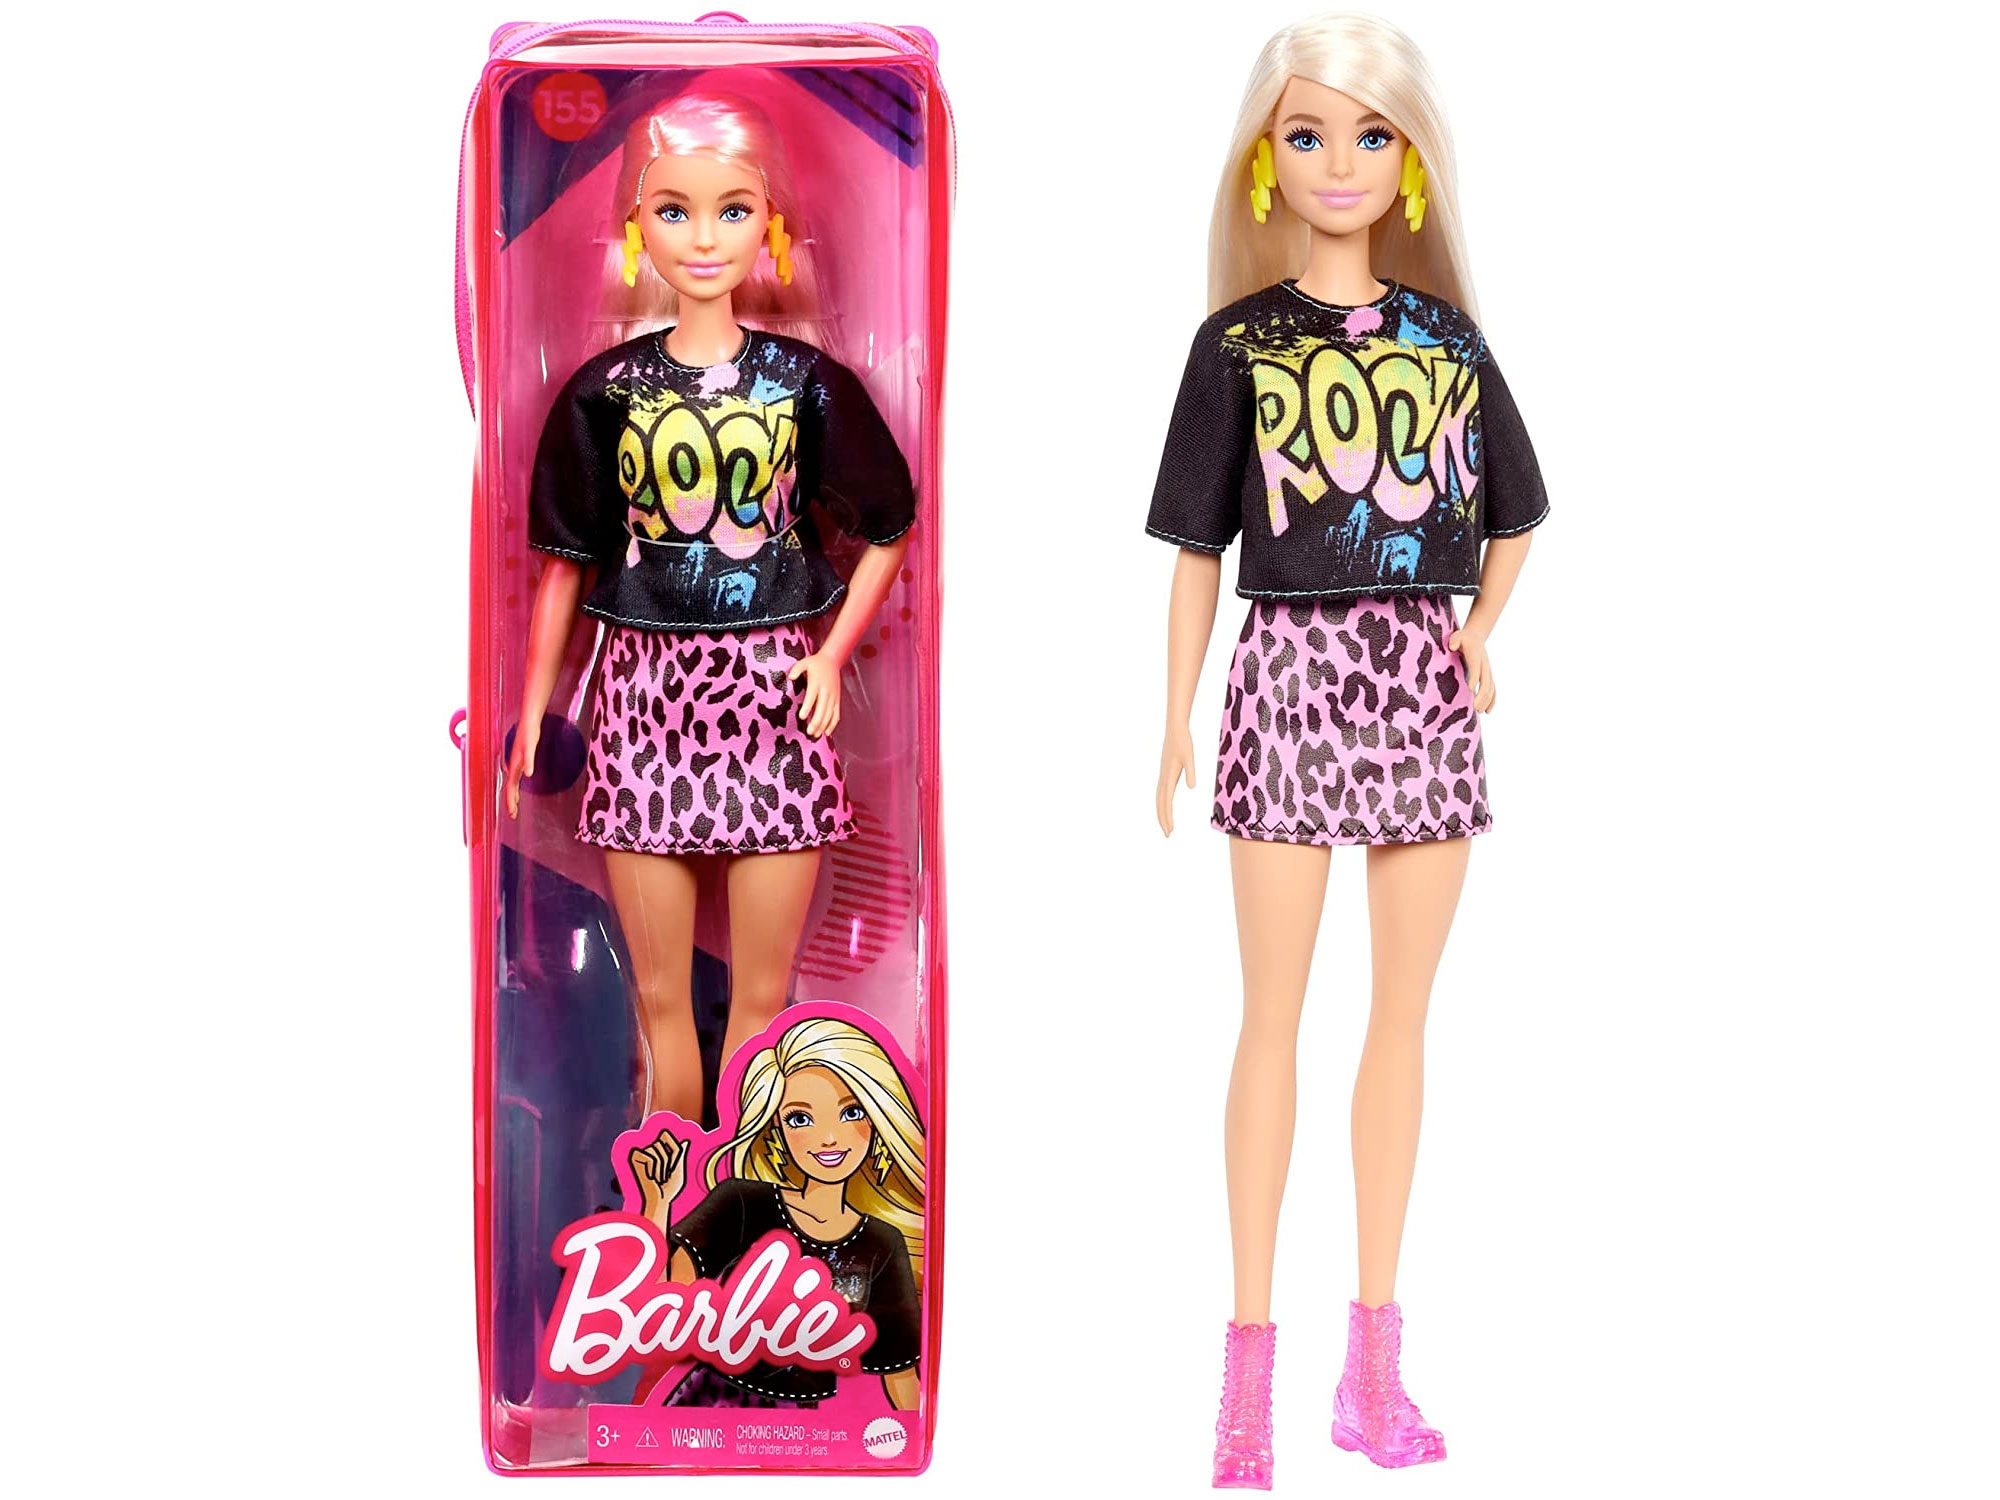 Amazon：Barbie Fashionistas Doll with Blond Hair with Rock Tee and Skirt只卖$7